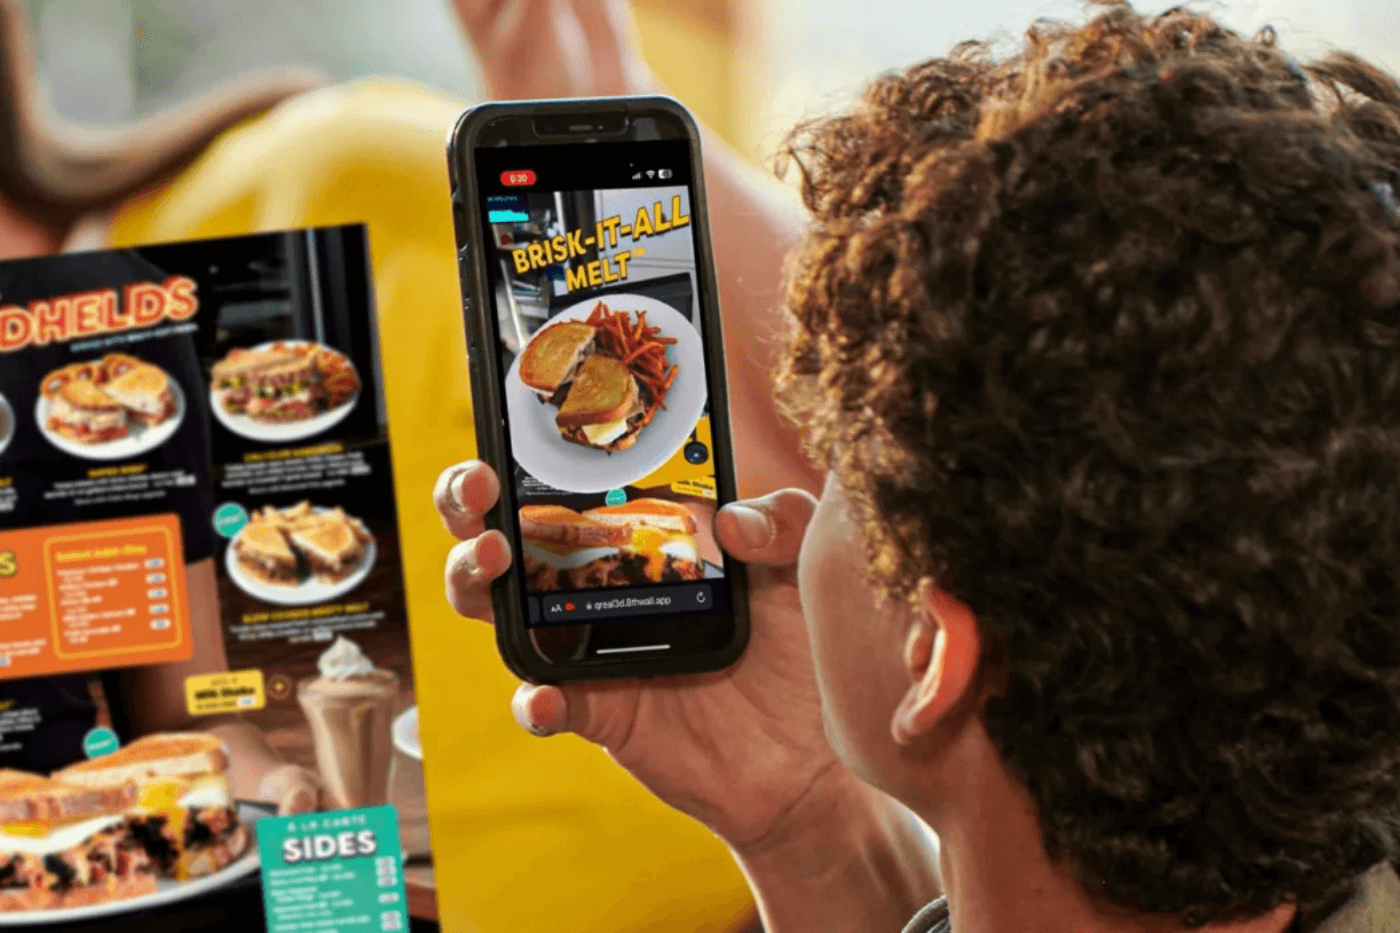 Denny's on Demand is a New Way to Order Food Through Your Phone